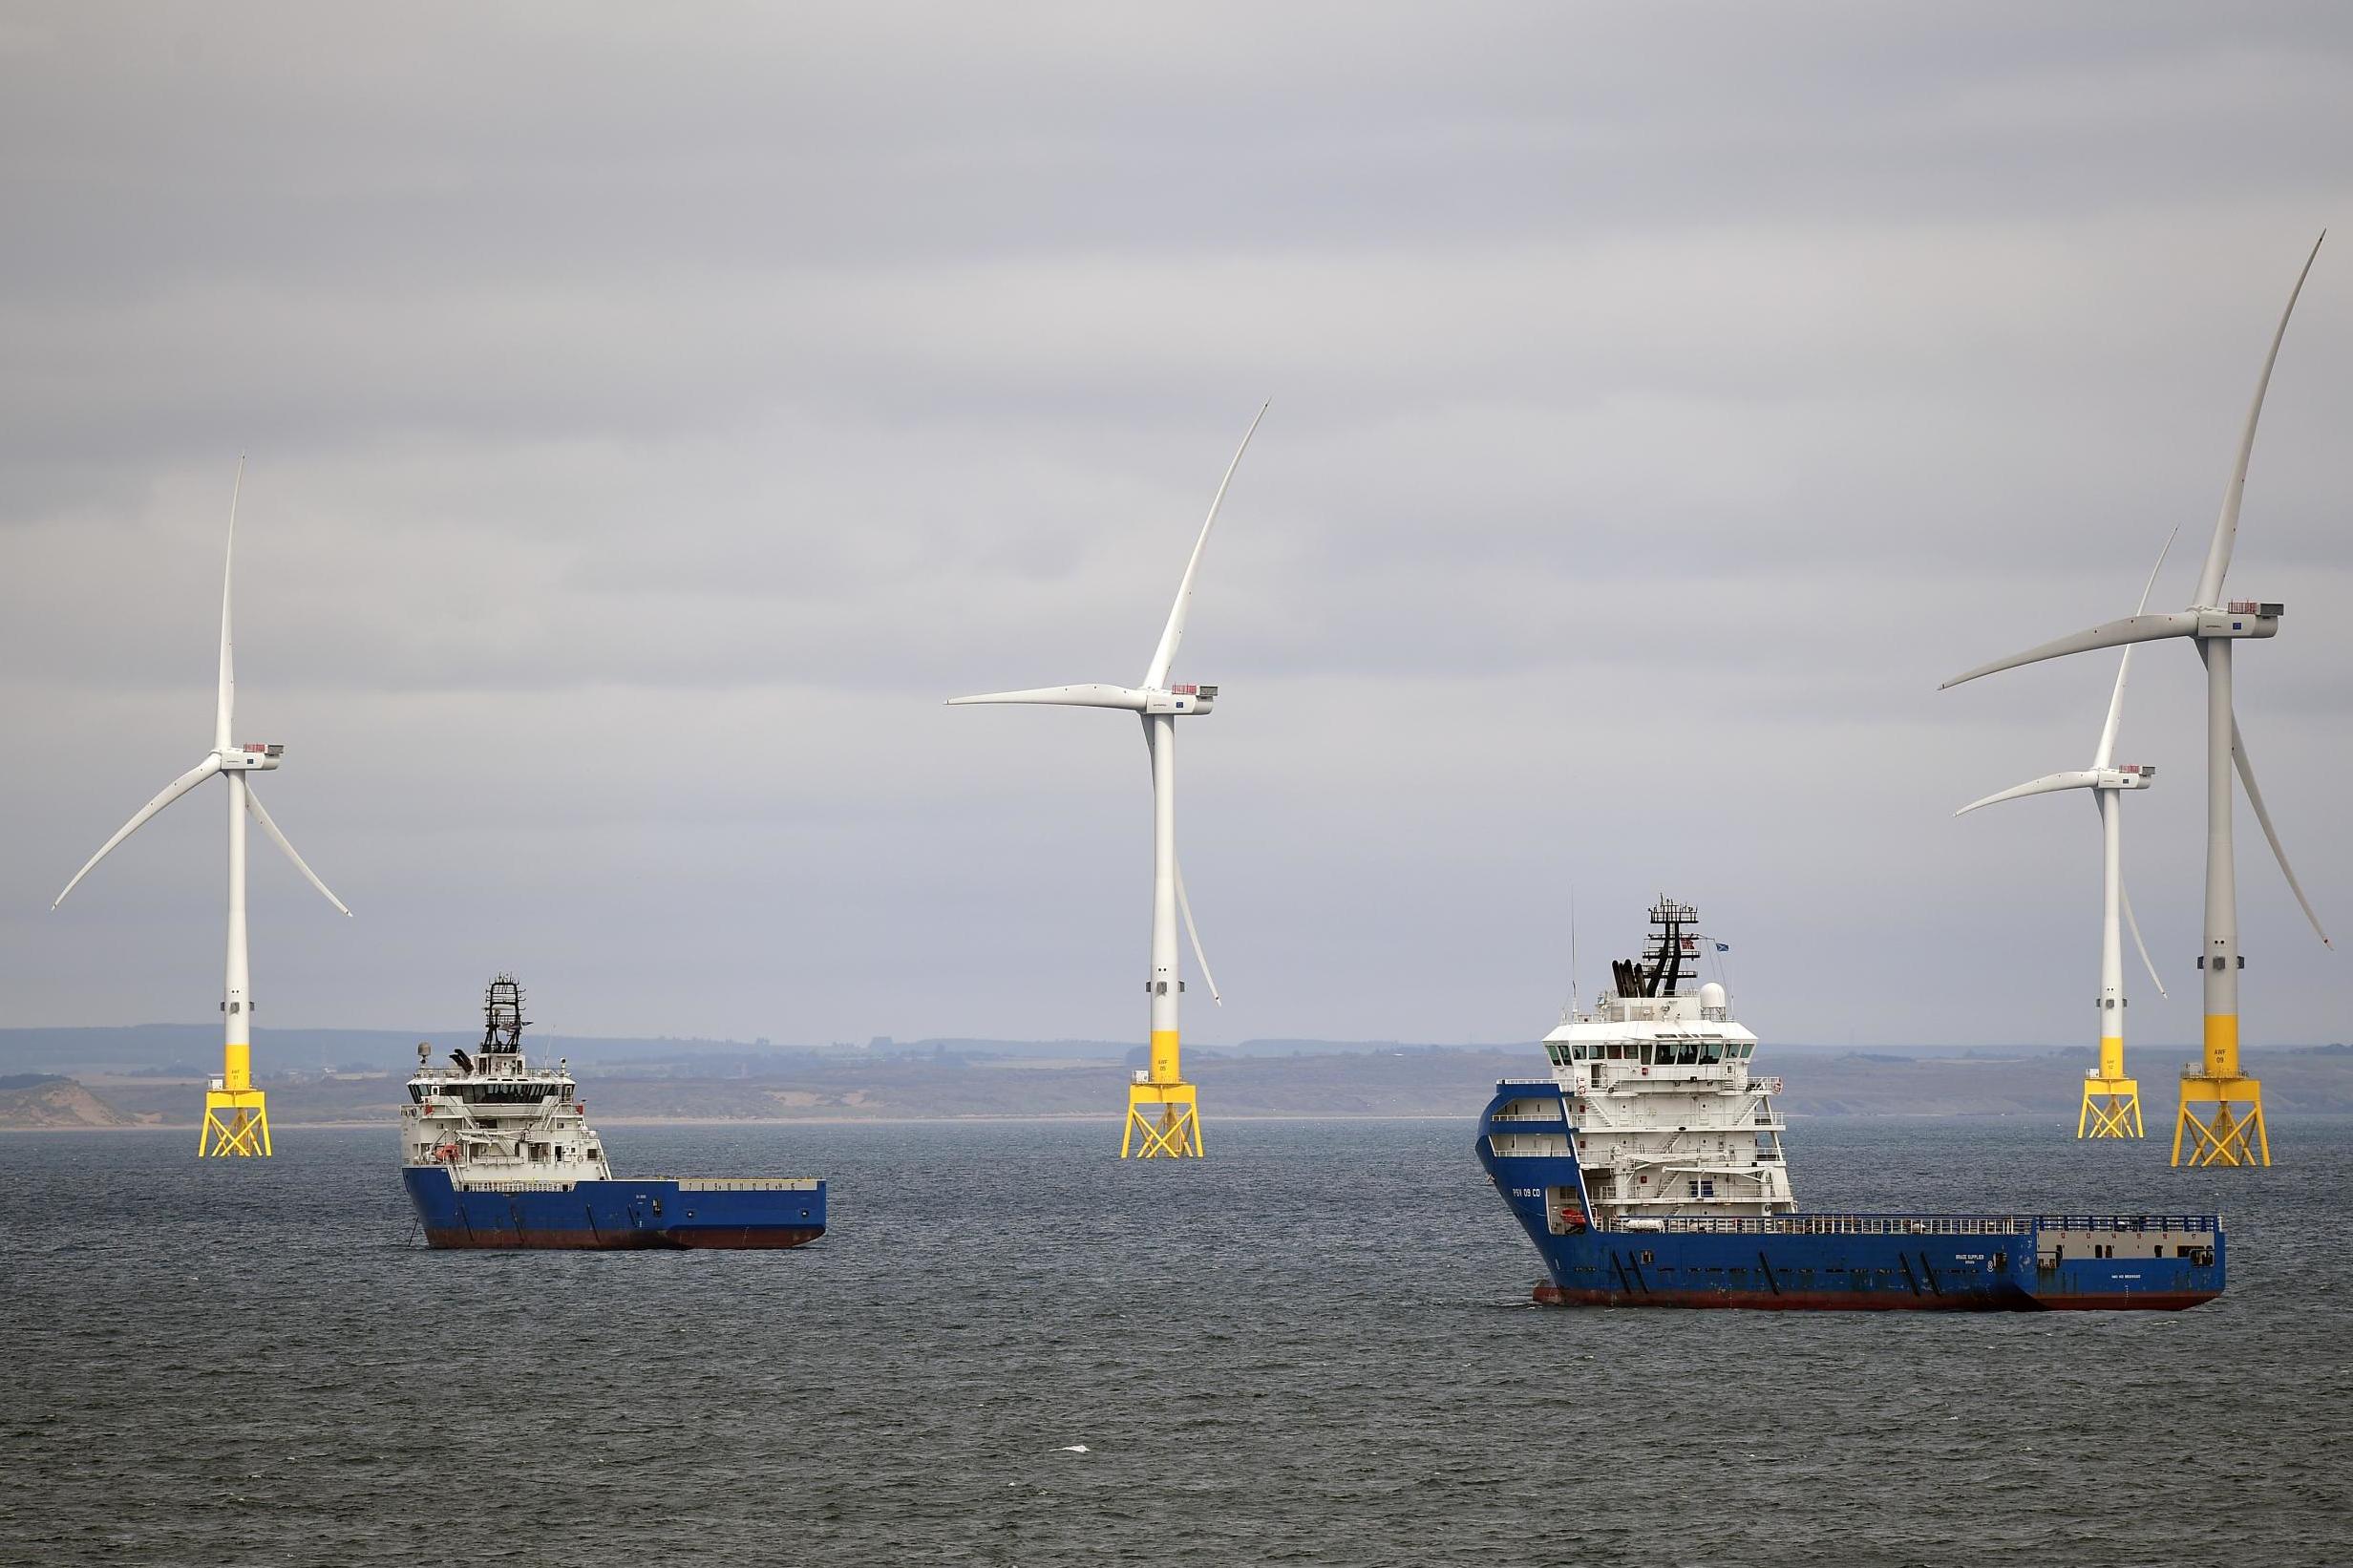 A general view of The European Offshore Wind Deployment Centre located in Aberdeen Bay on 7 September 2018 in Scotland which Donald Trump had opposed because of his neighbouring golf course.